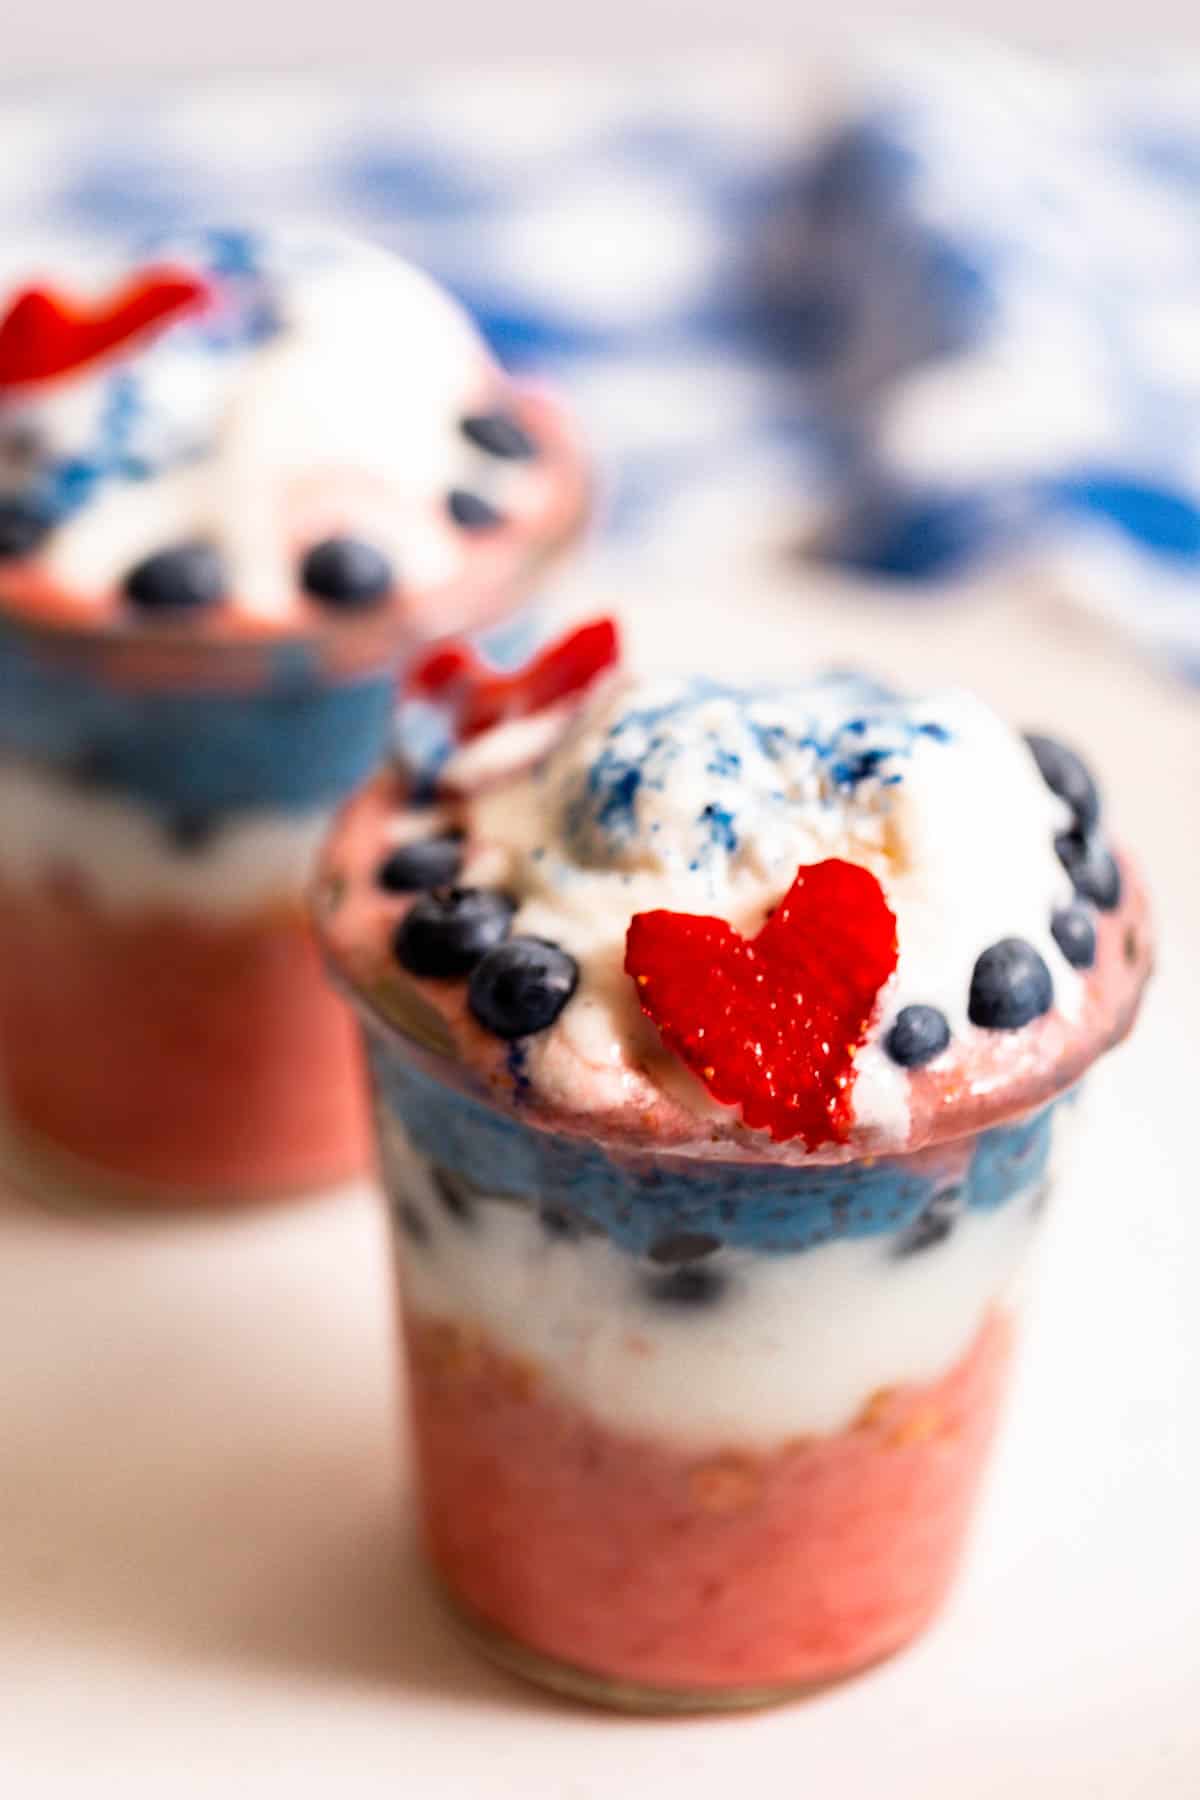 Two naturally-colored red, white, and blue parfaits covered in blueberries and a strawberry heart.